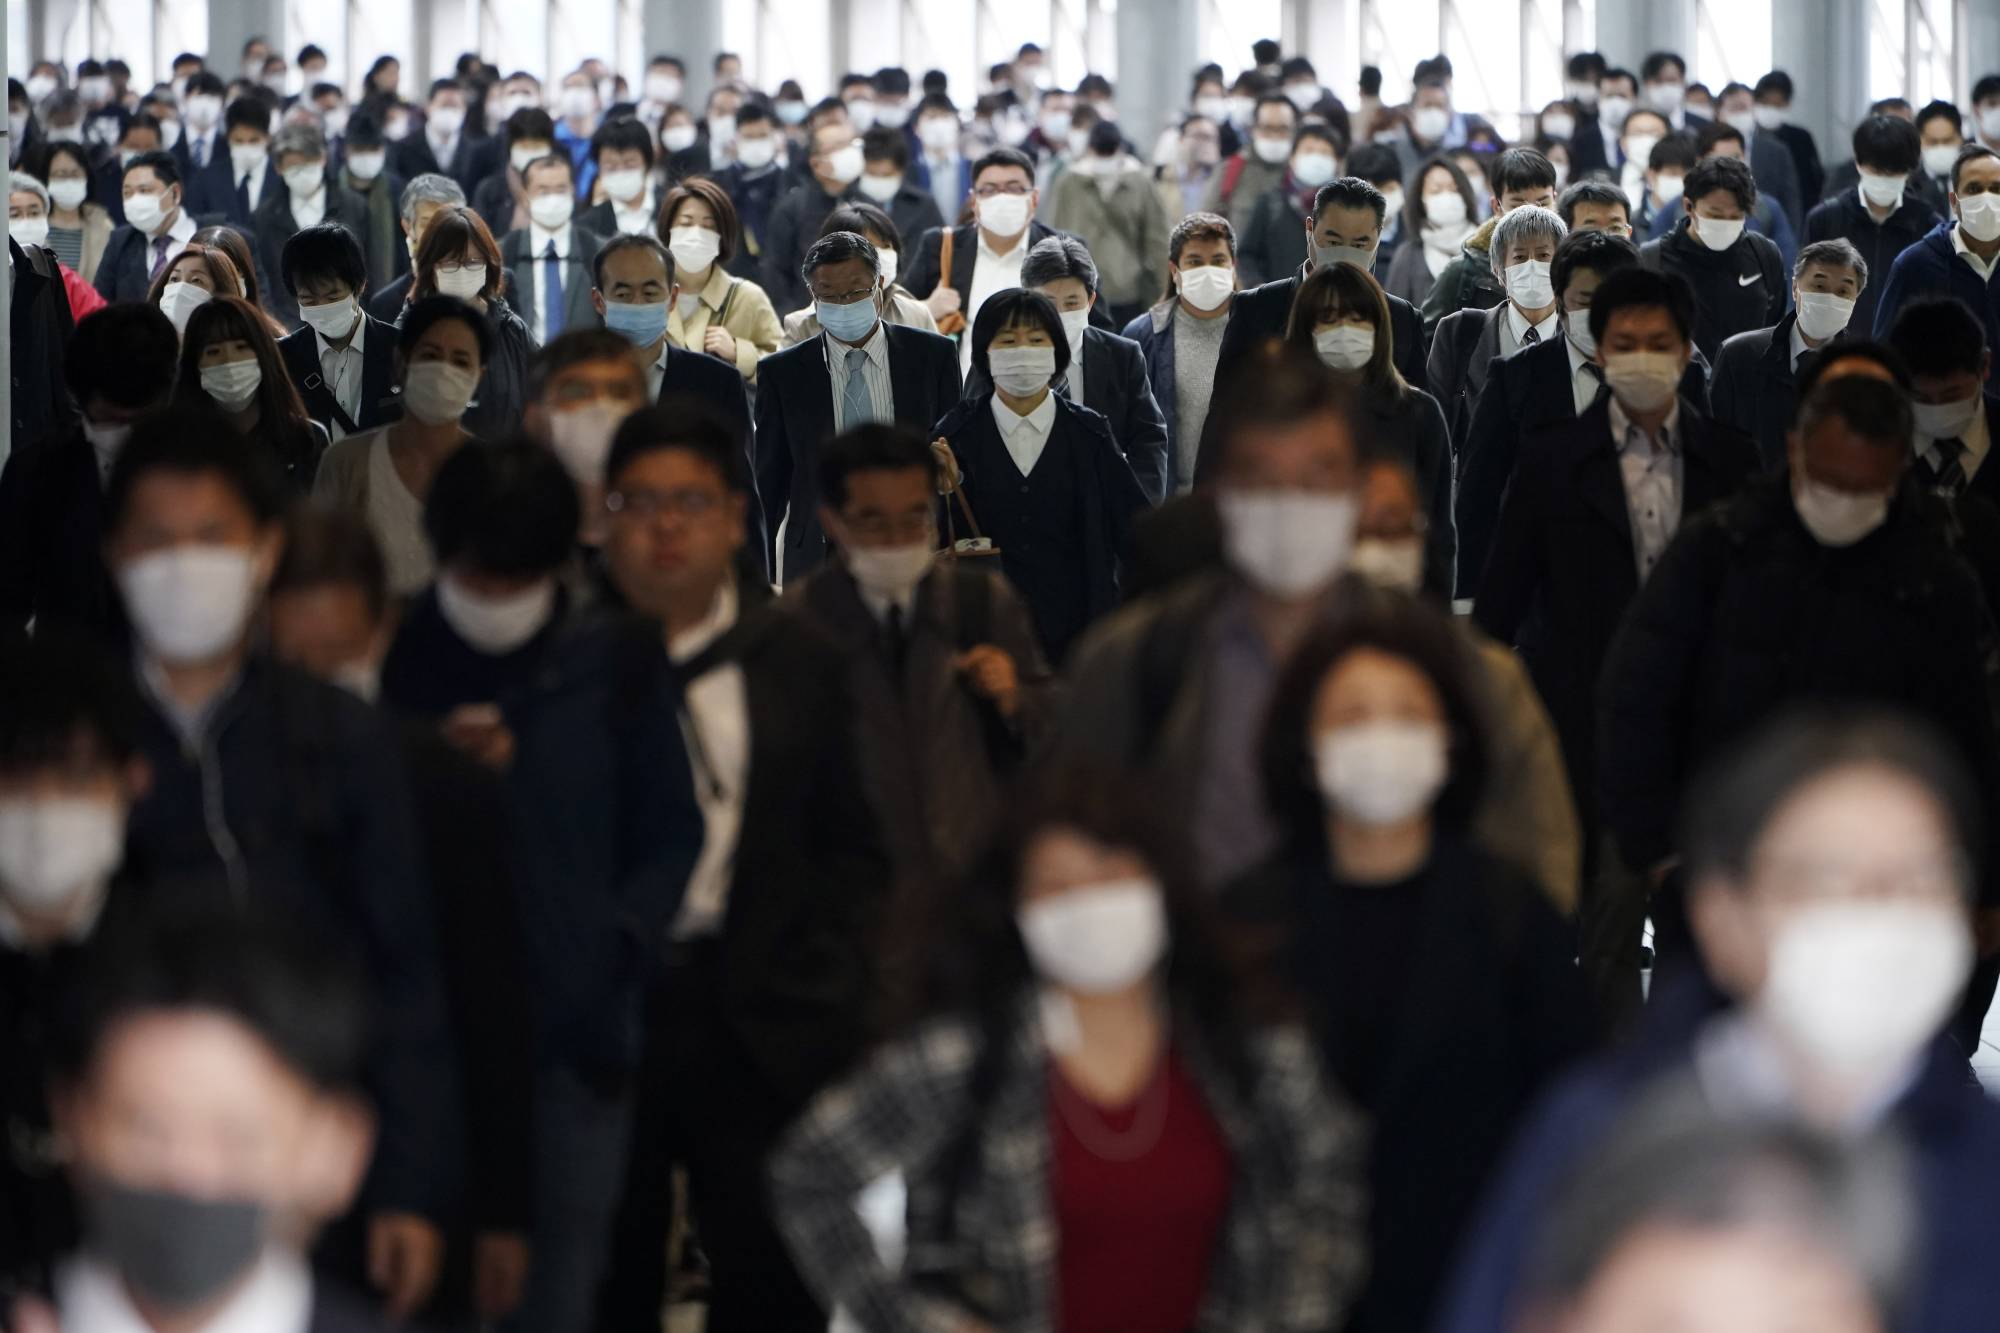 A Tokyo train station passageway is crowded with commuters during rush hour on Monday. | AP